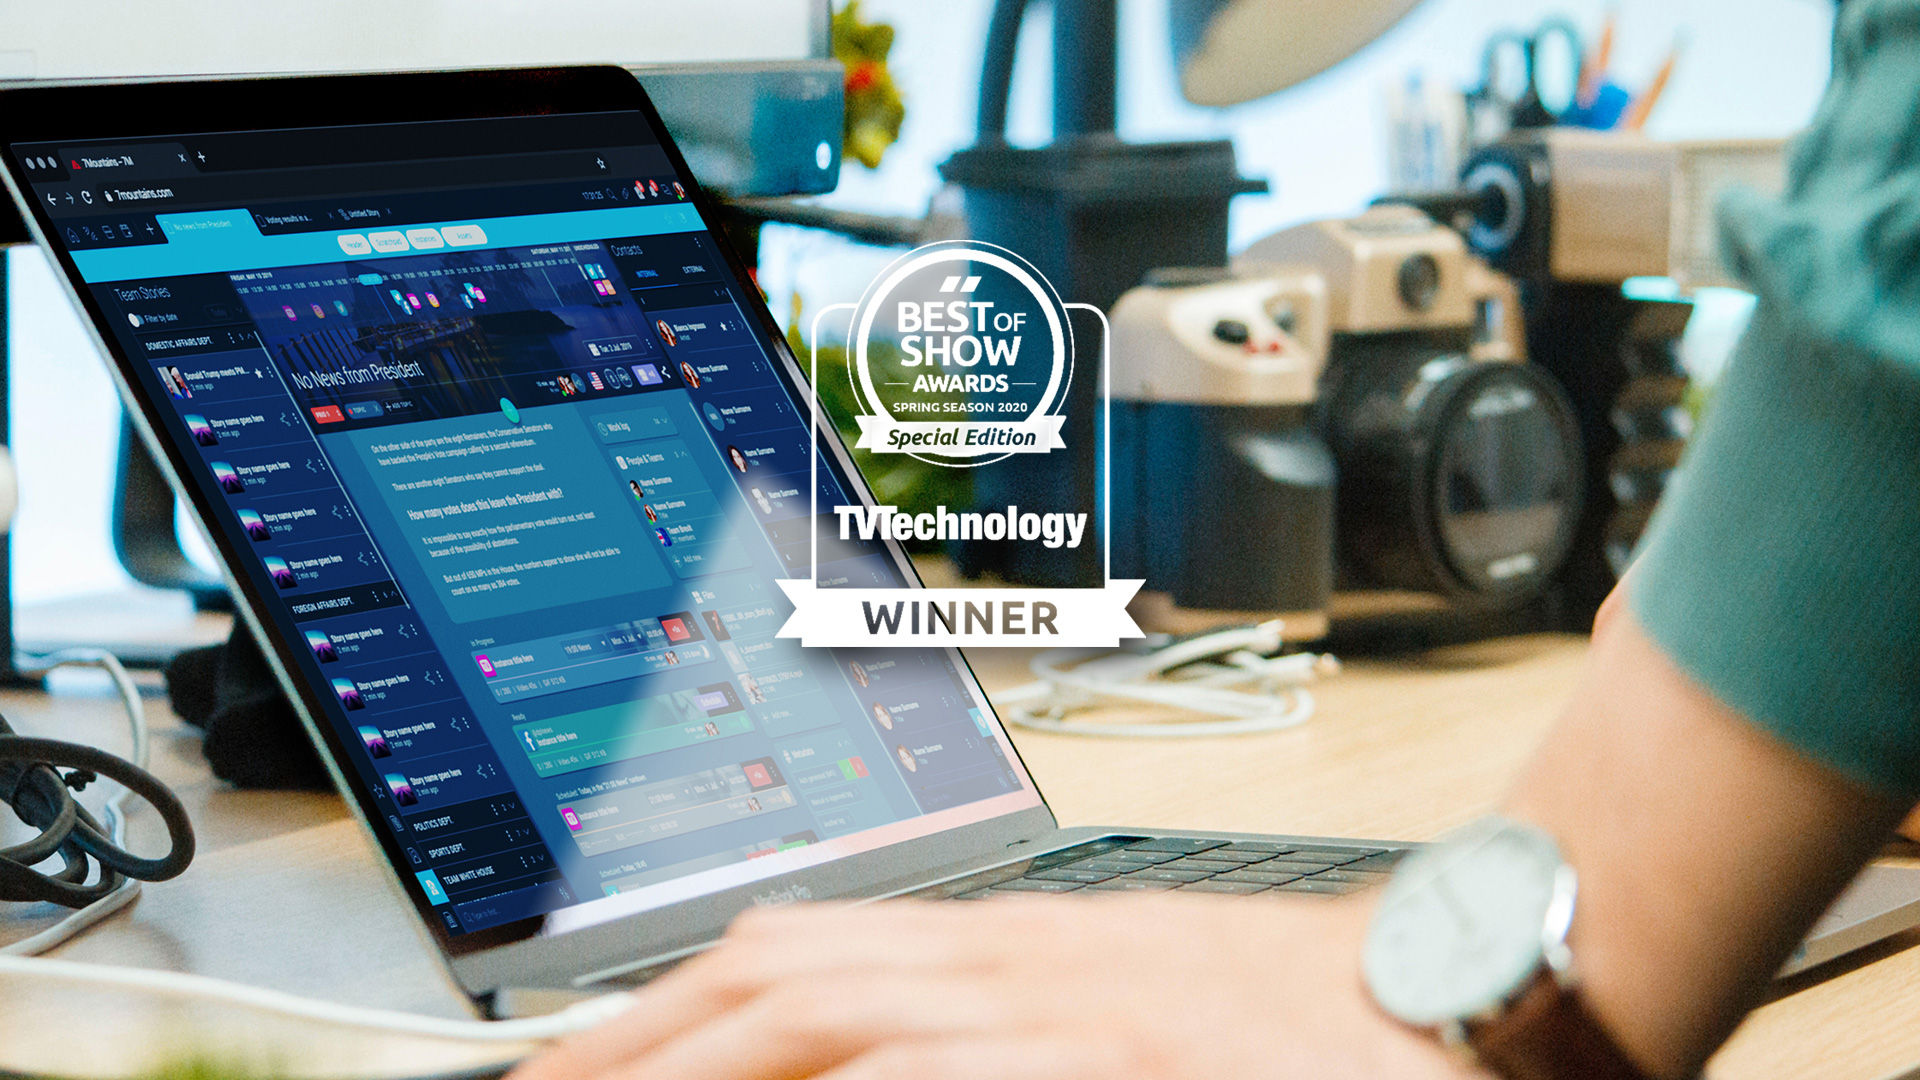 7Mountains and DiNA Wins Future Best of Show Award, Presented by TV Technology